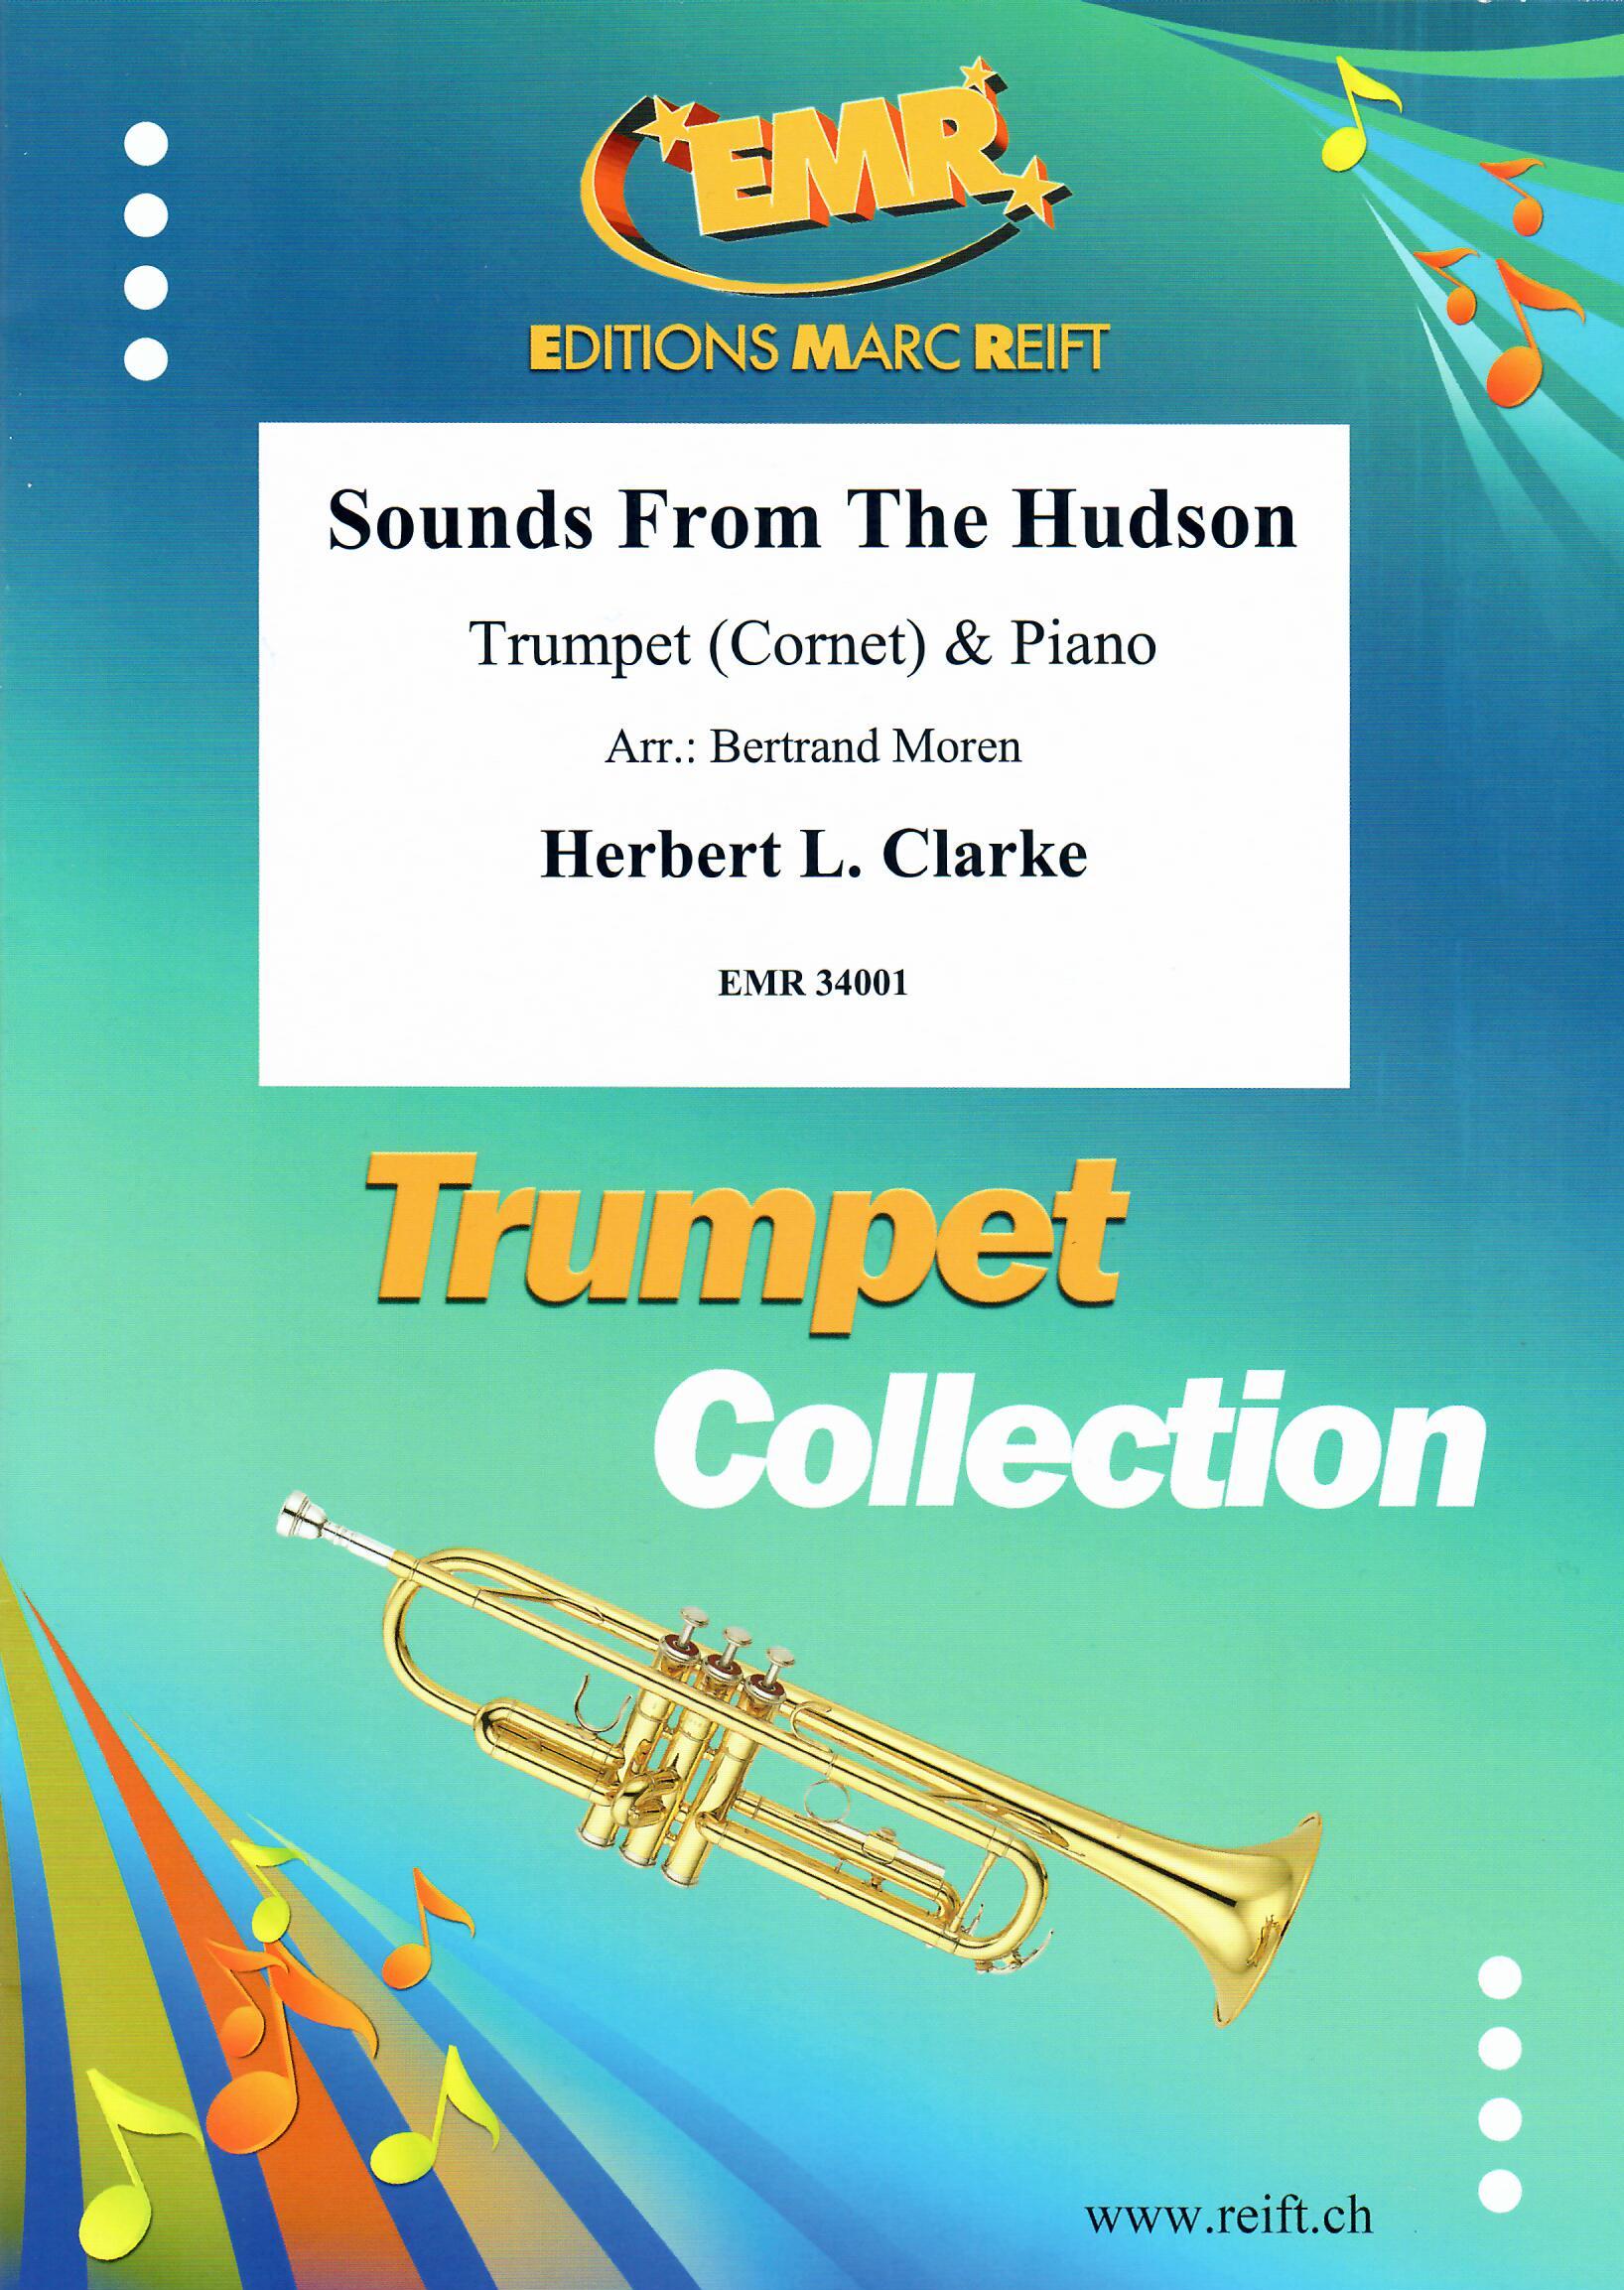 SOUNDS FROM THE HUDSON, SOLOS - B♭. Cornet/Trumpet with Piano